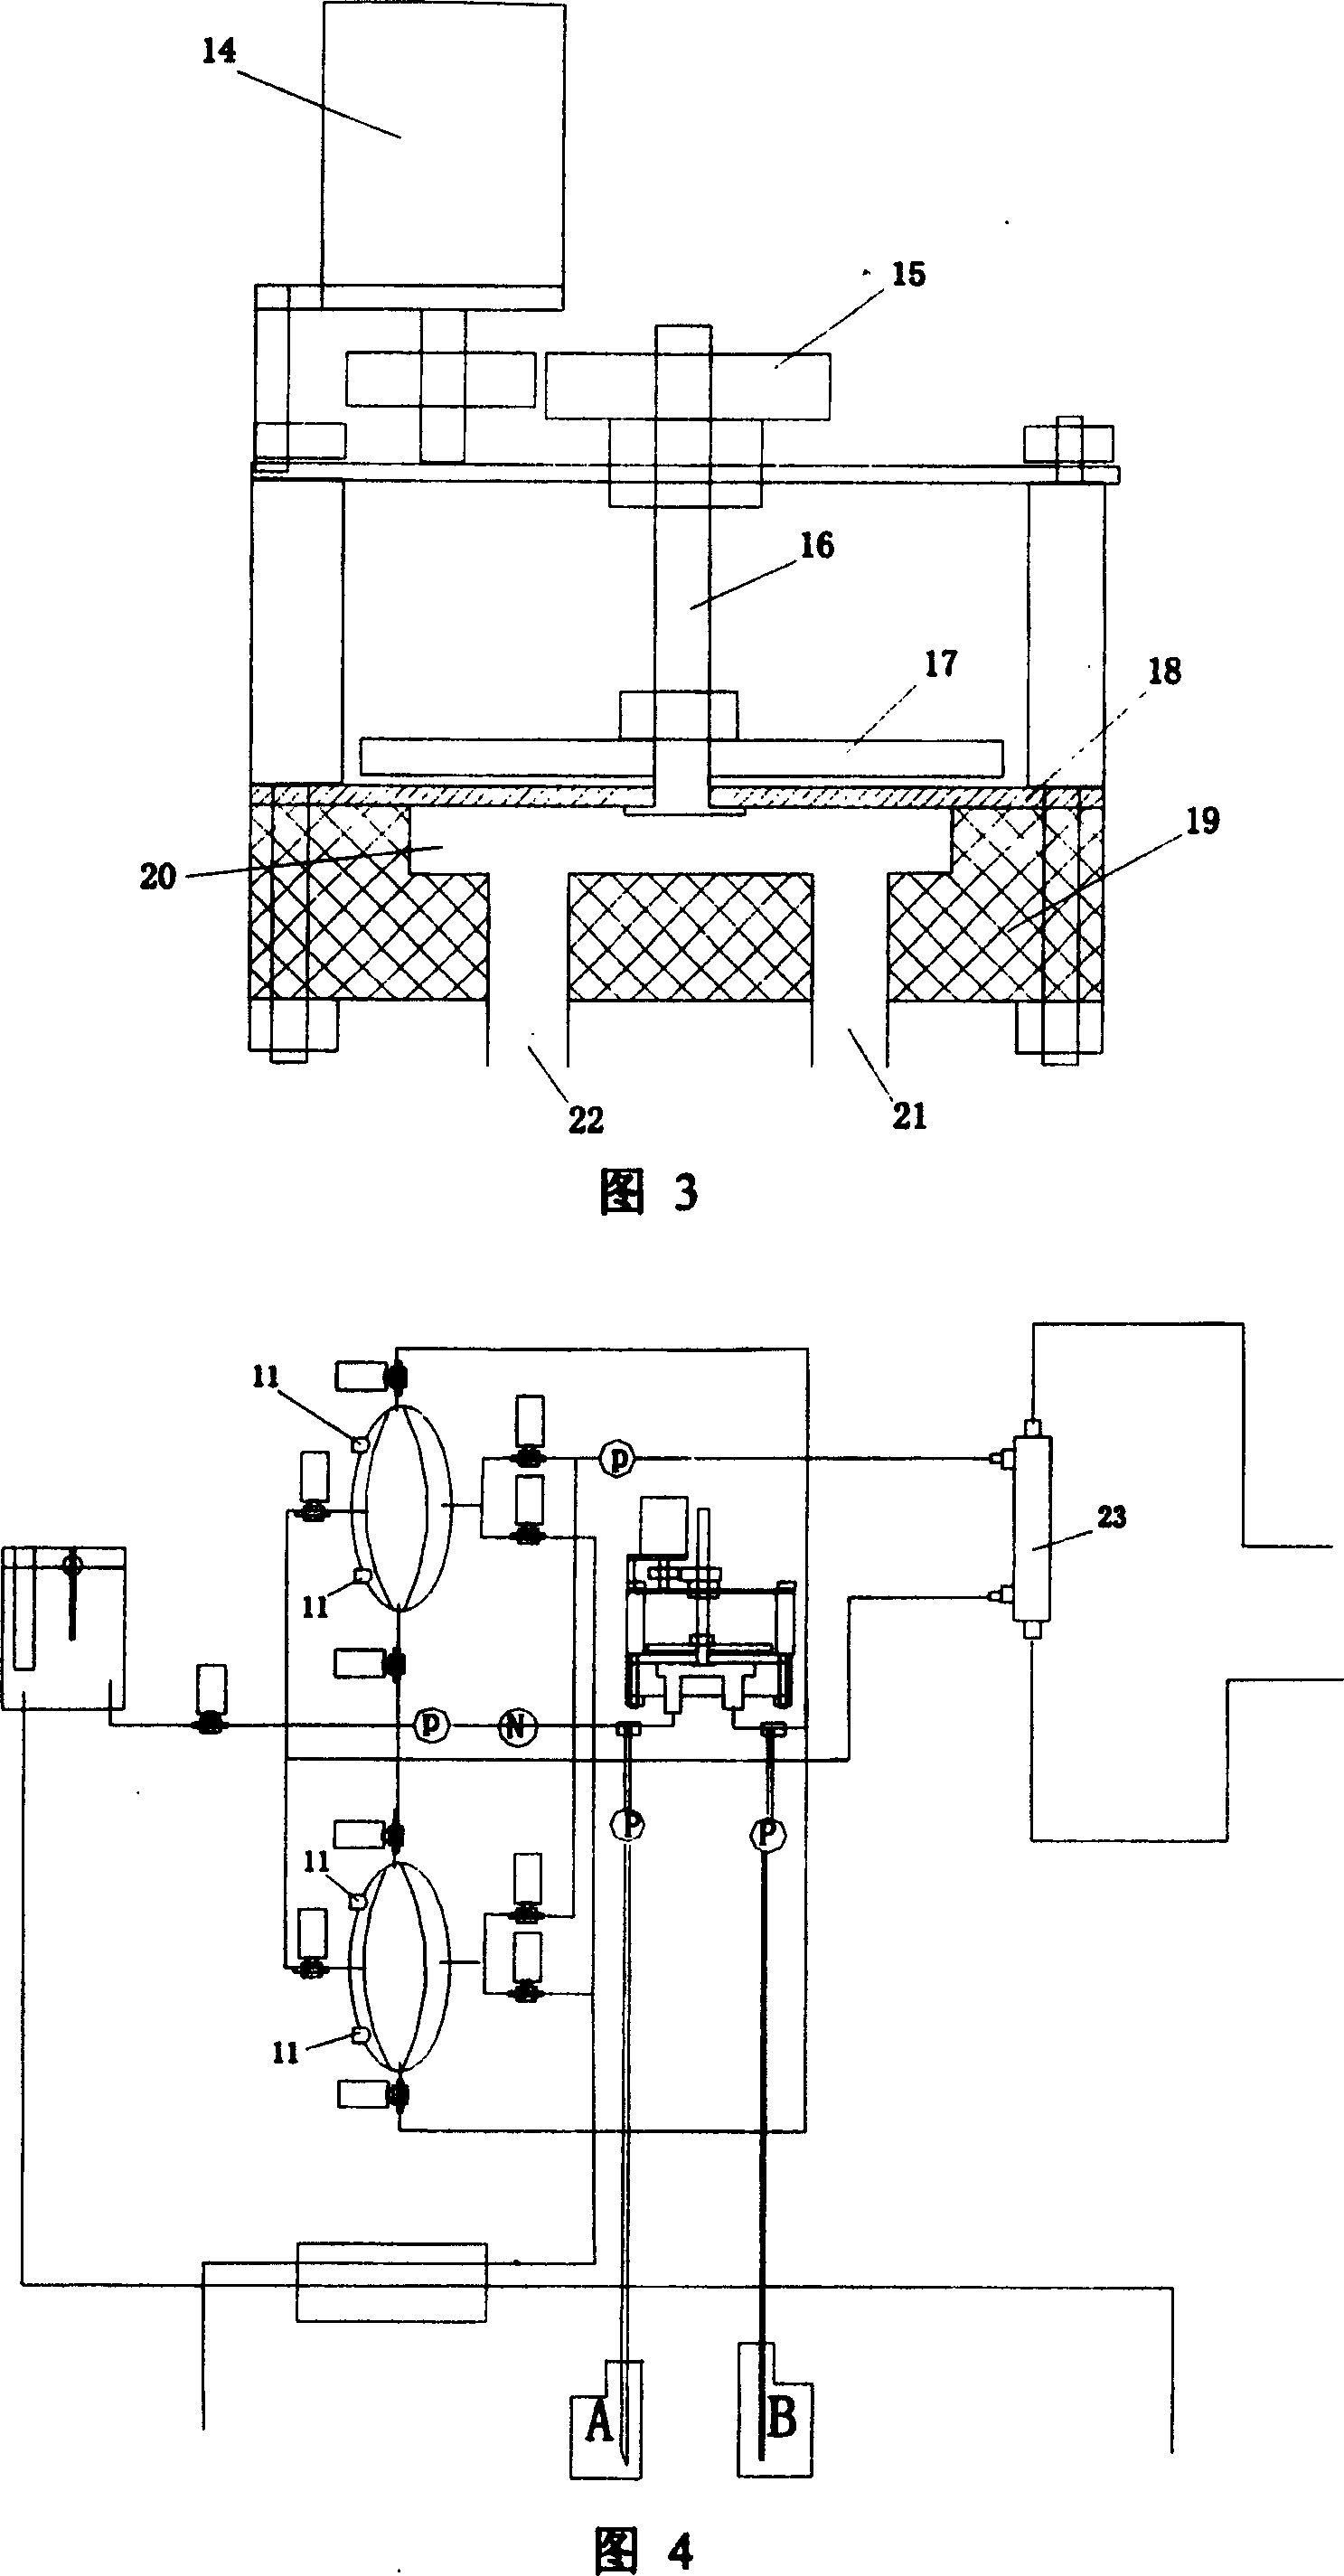 Method and apparatus for dialysate preparation and supply